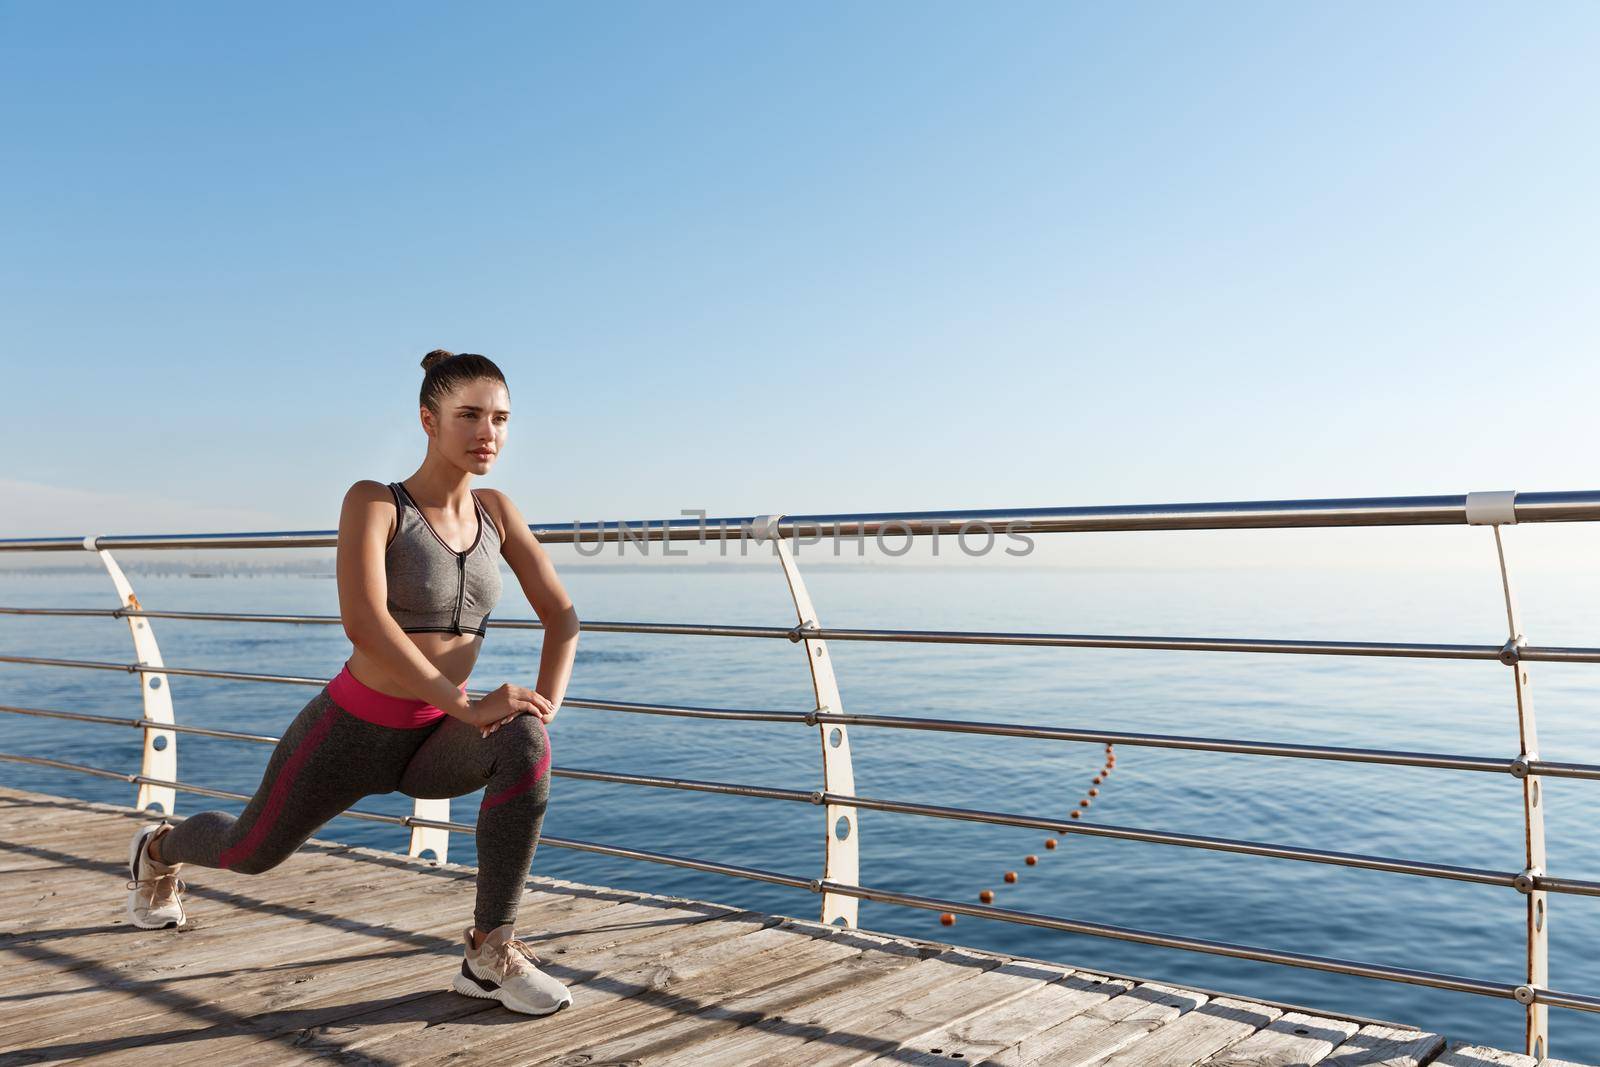 Outdoor shot of smiling fitness woman stretching and working out on the seaside promenade.